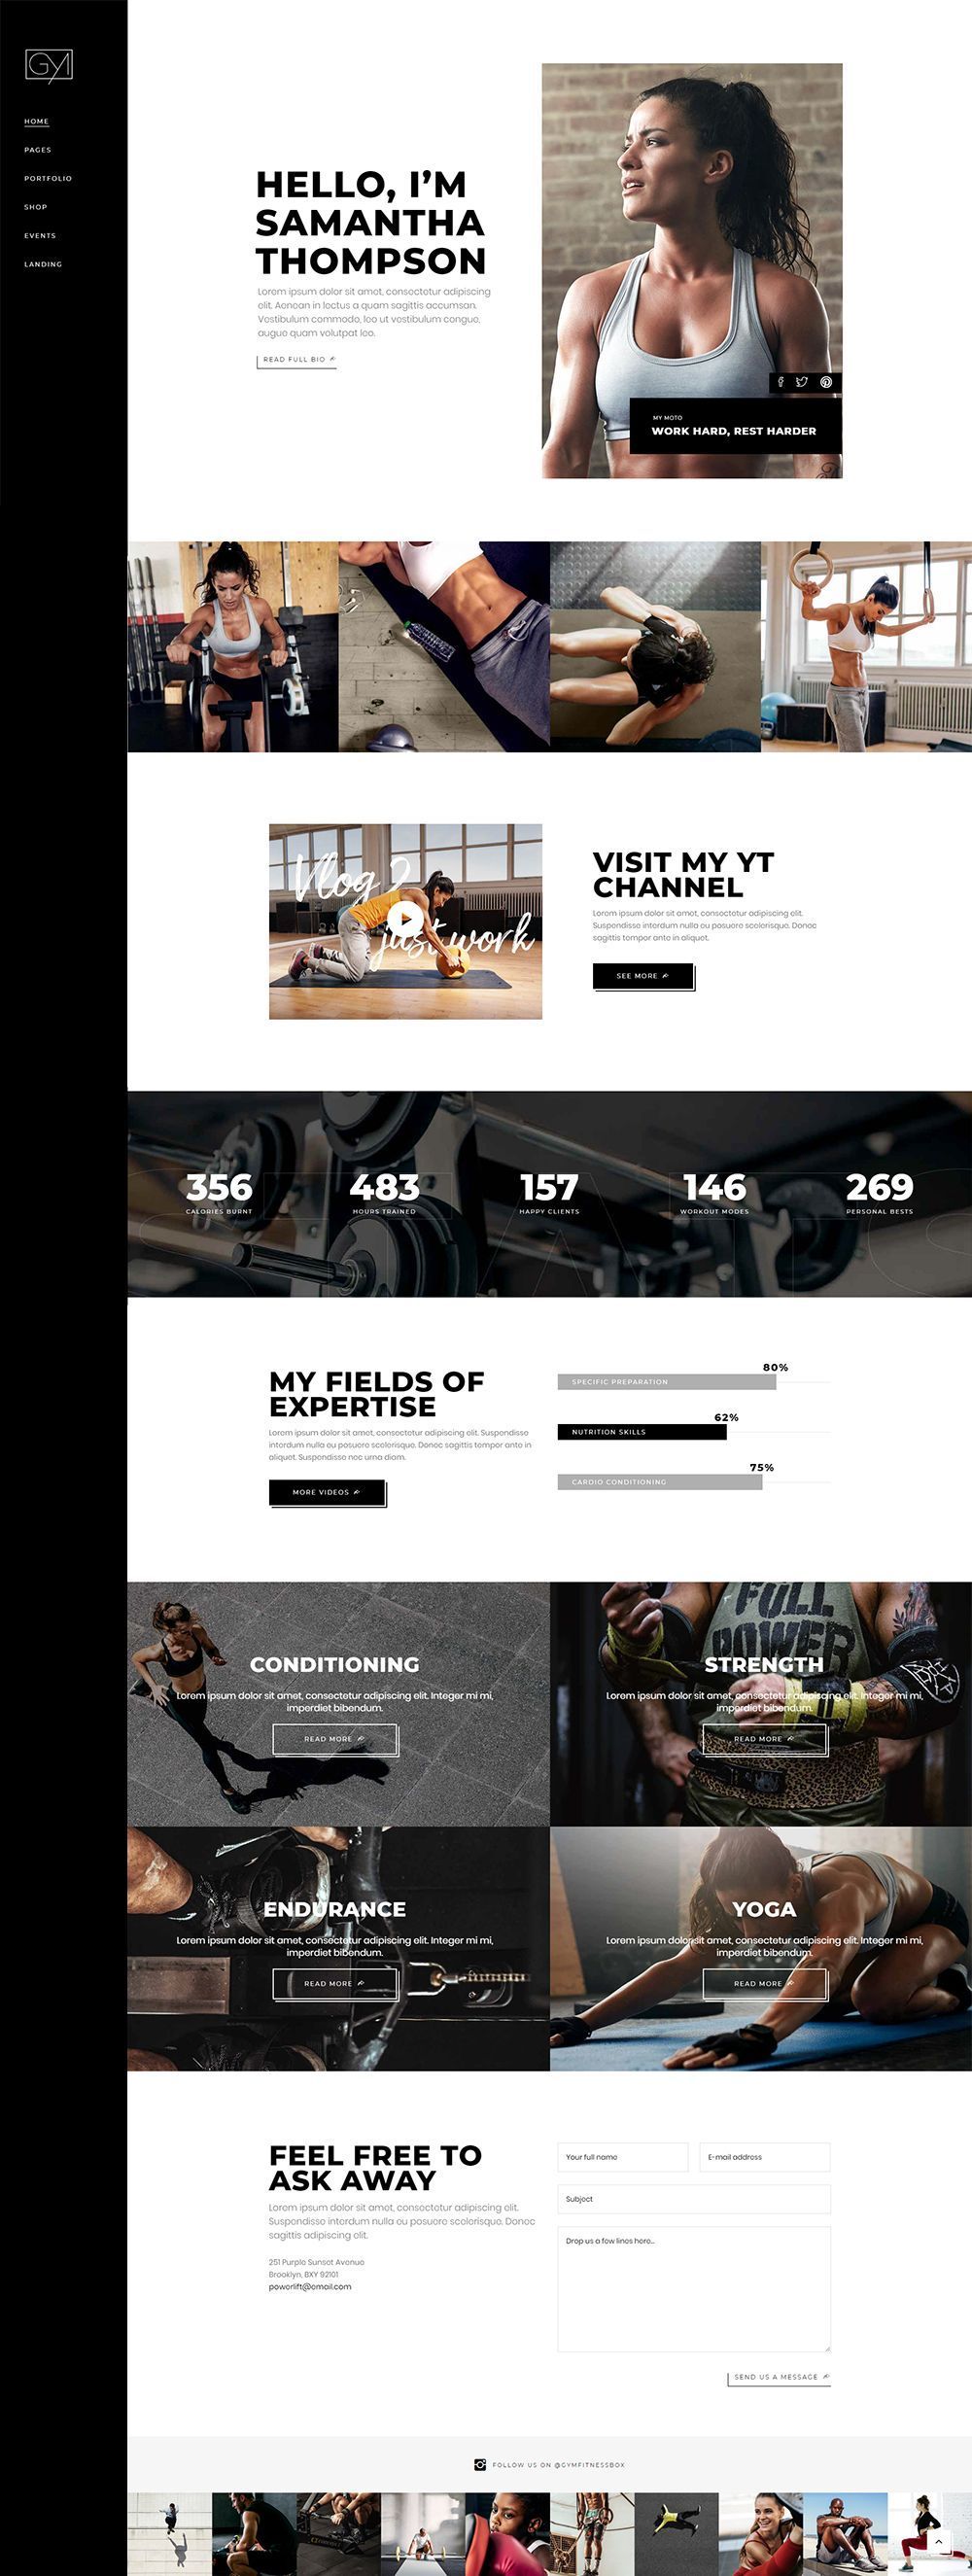 Powerlift - Fitness and Gym Theme - Powerlift - Fitness and Gym Theme -   16 fitness Design layout ideas